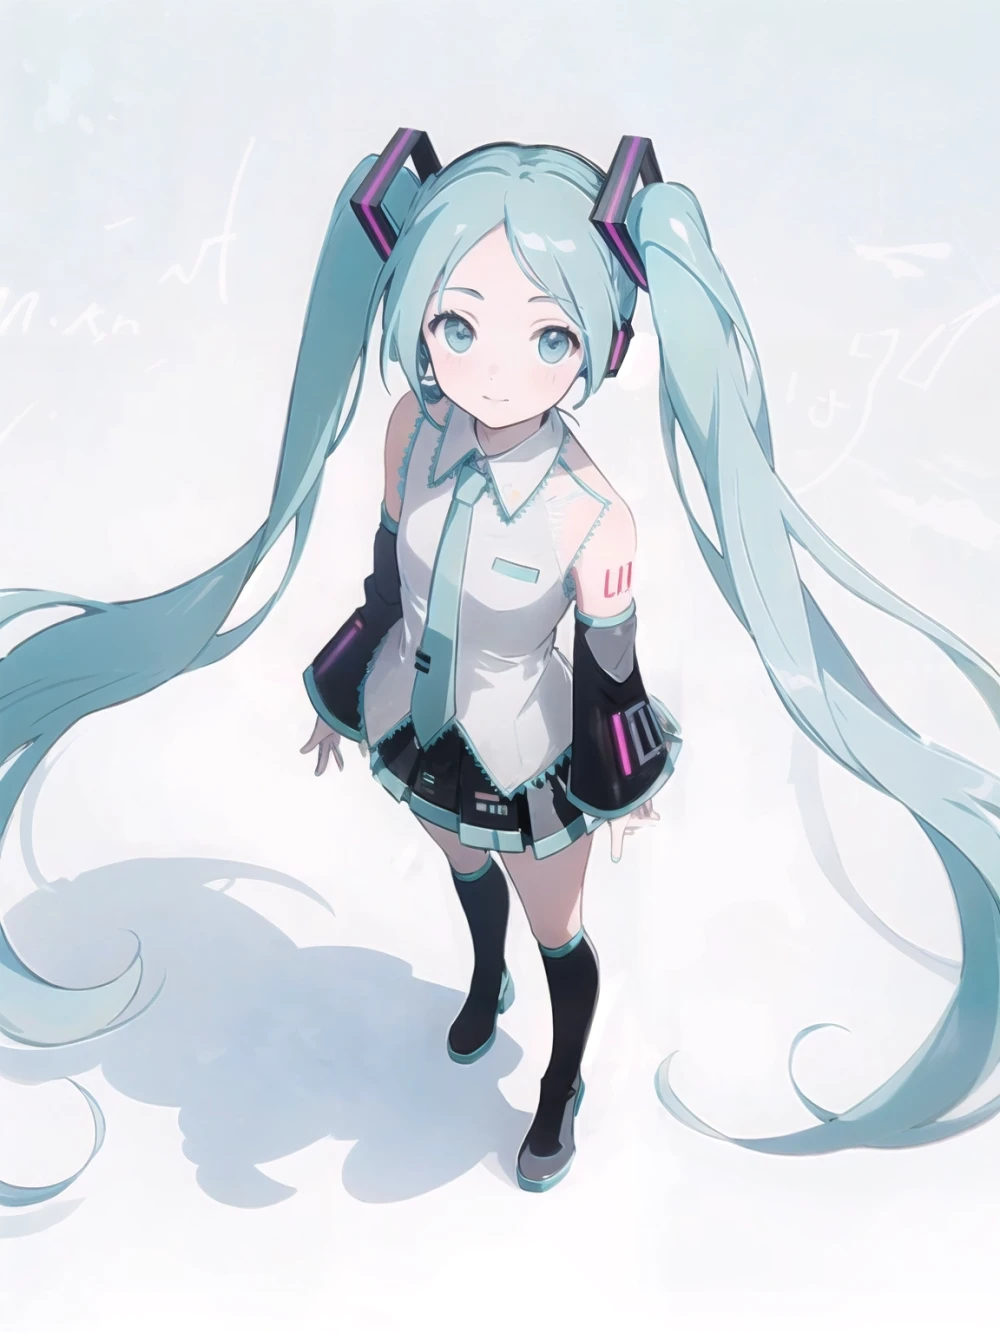 hatsune-miku-anime-style-all-ages-2-6